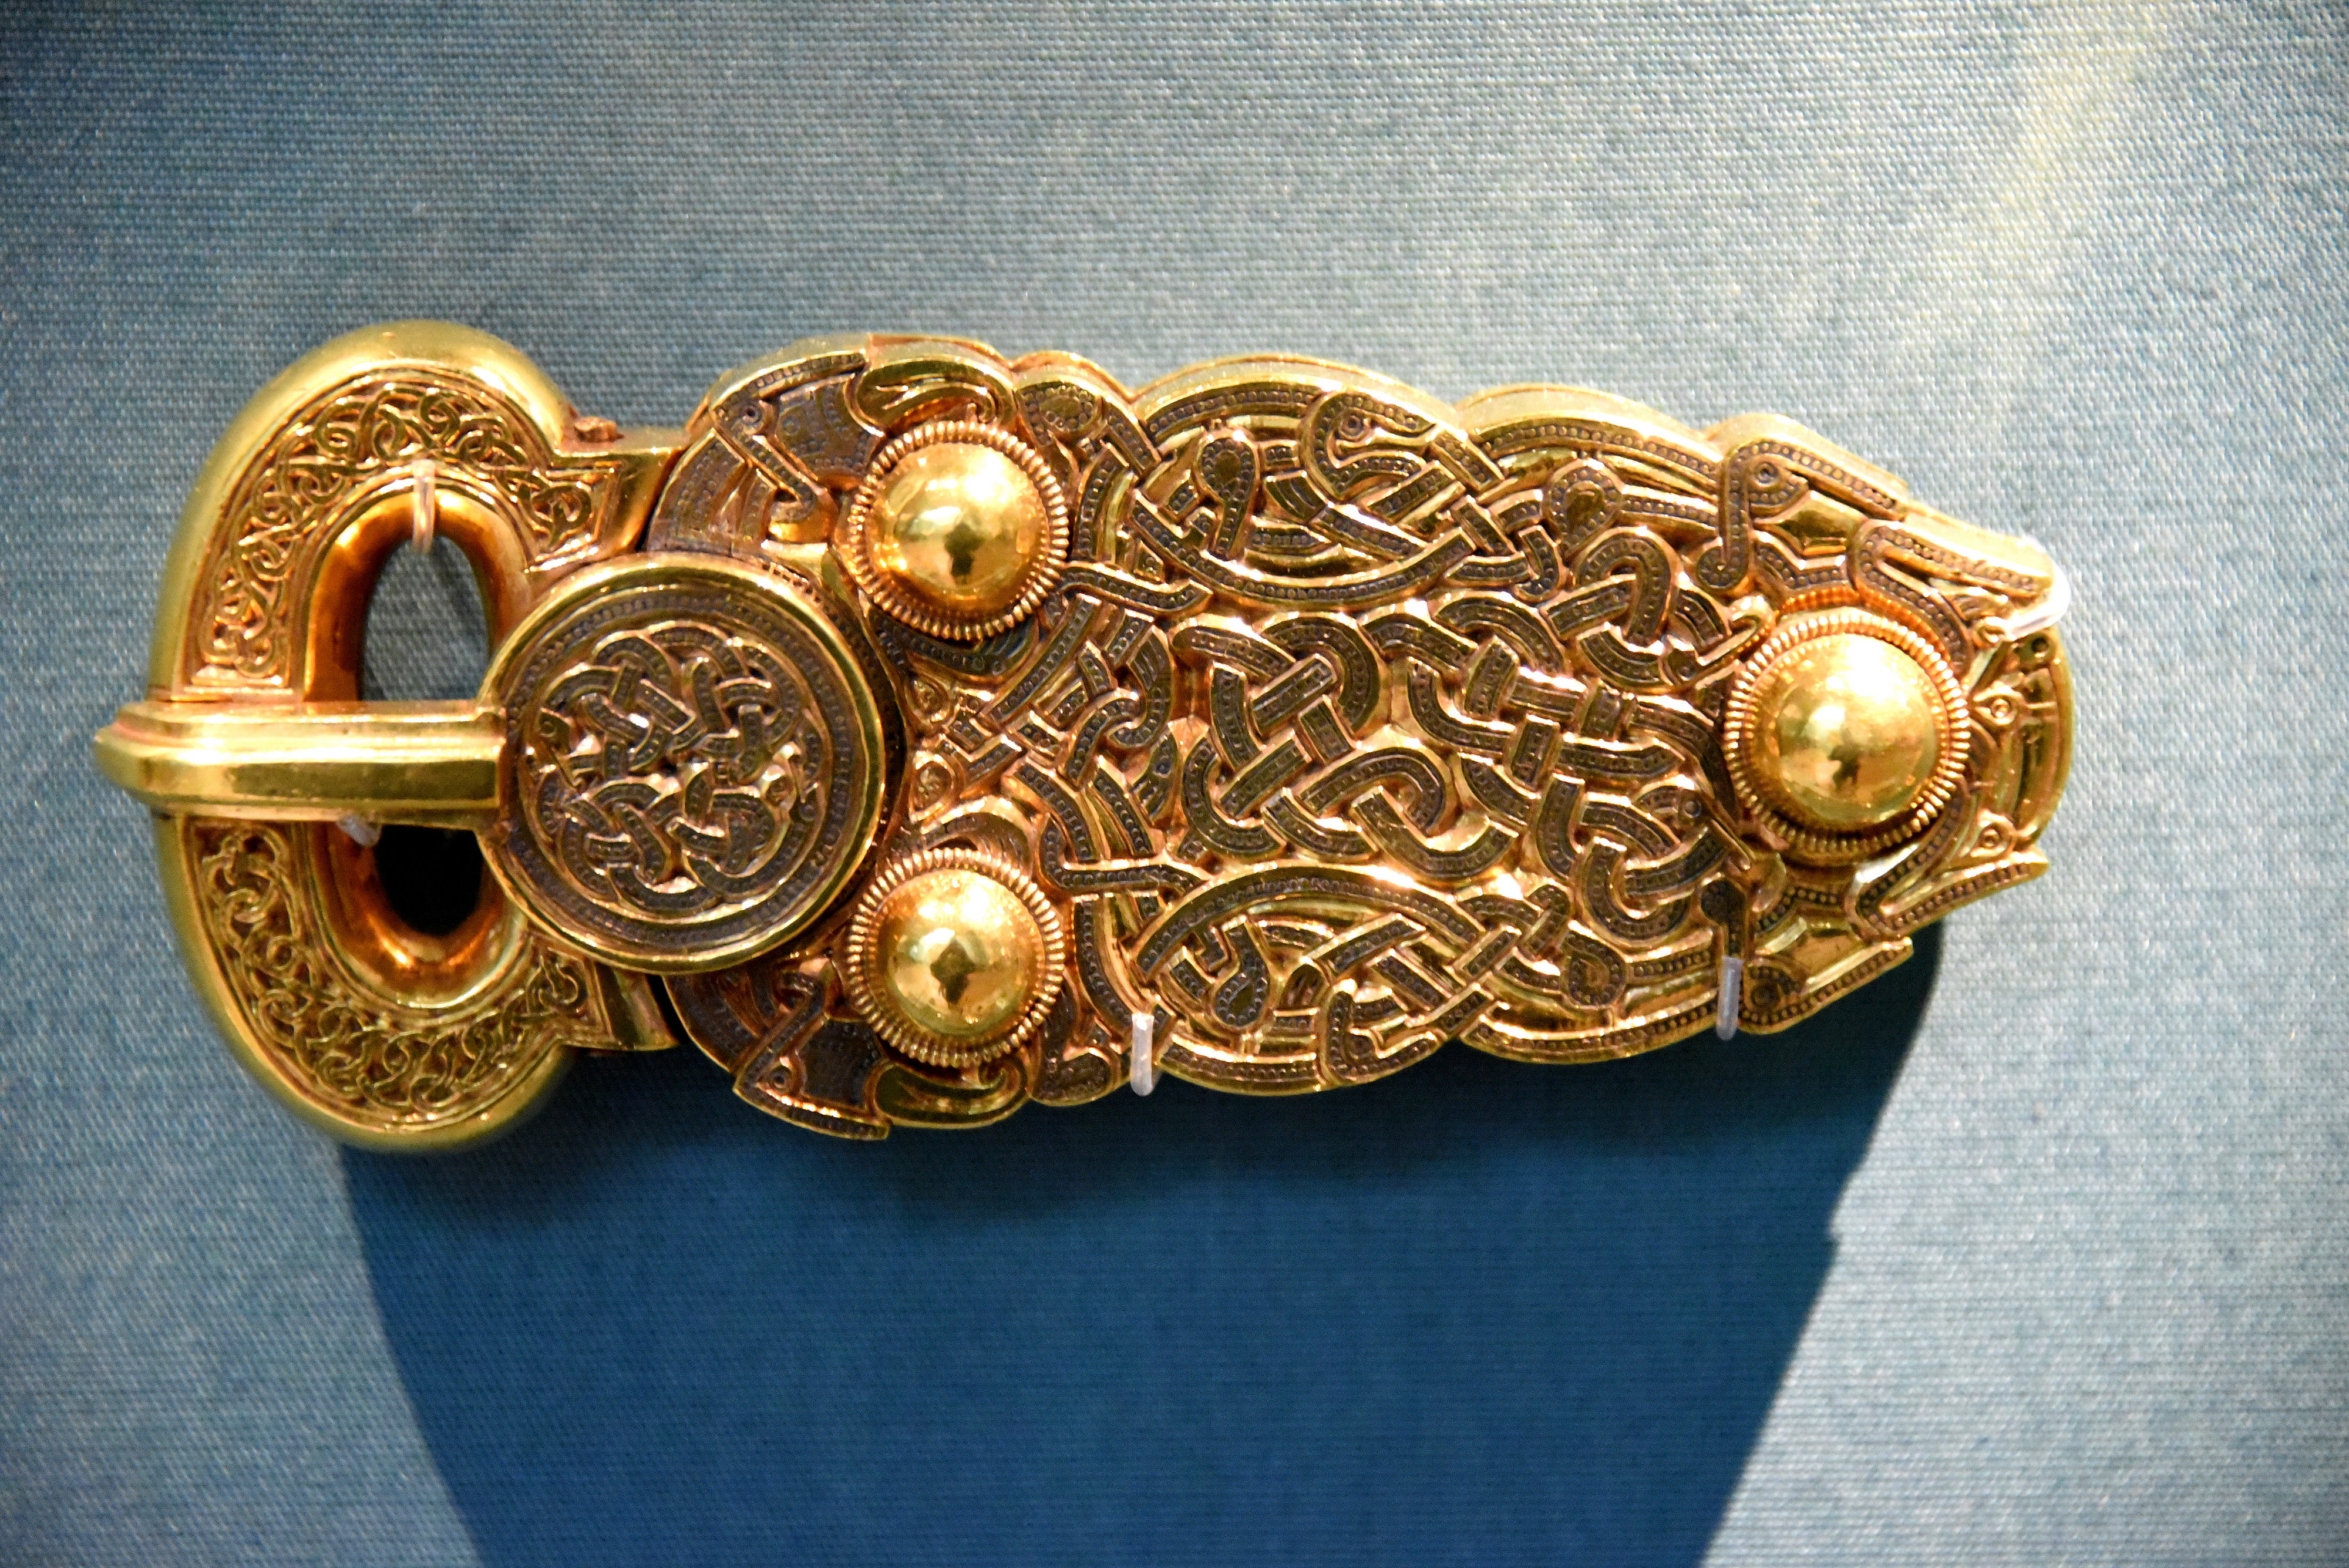 The Sutton Hoo Great Gold Buckle (Illustration) - World History Encyclopedia